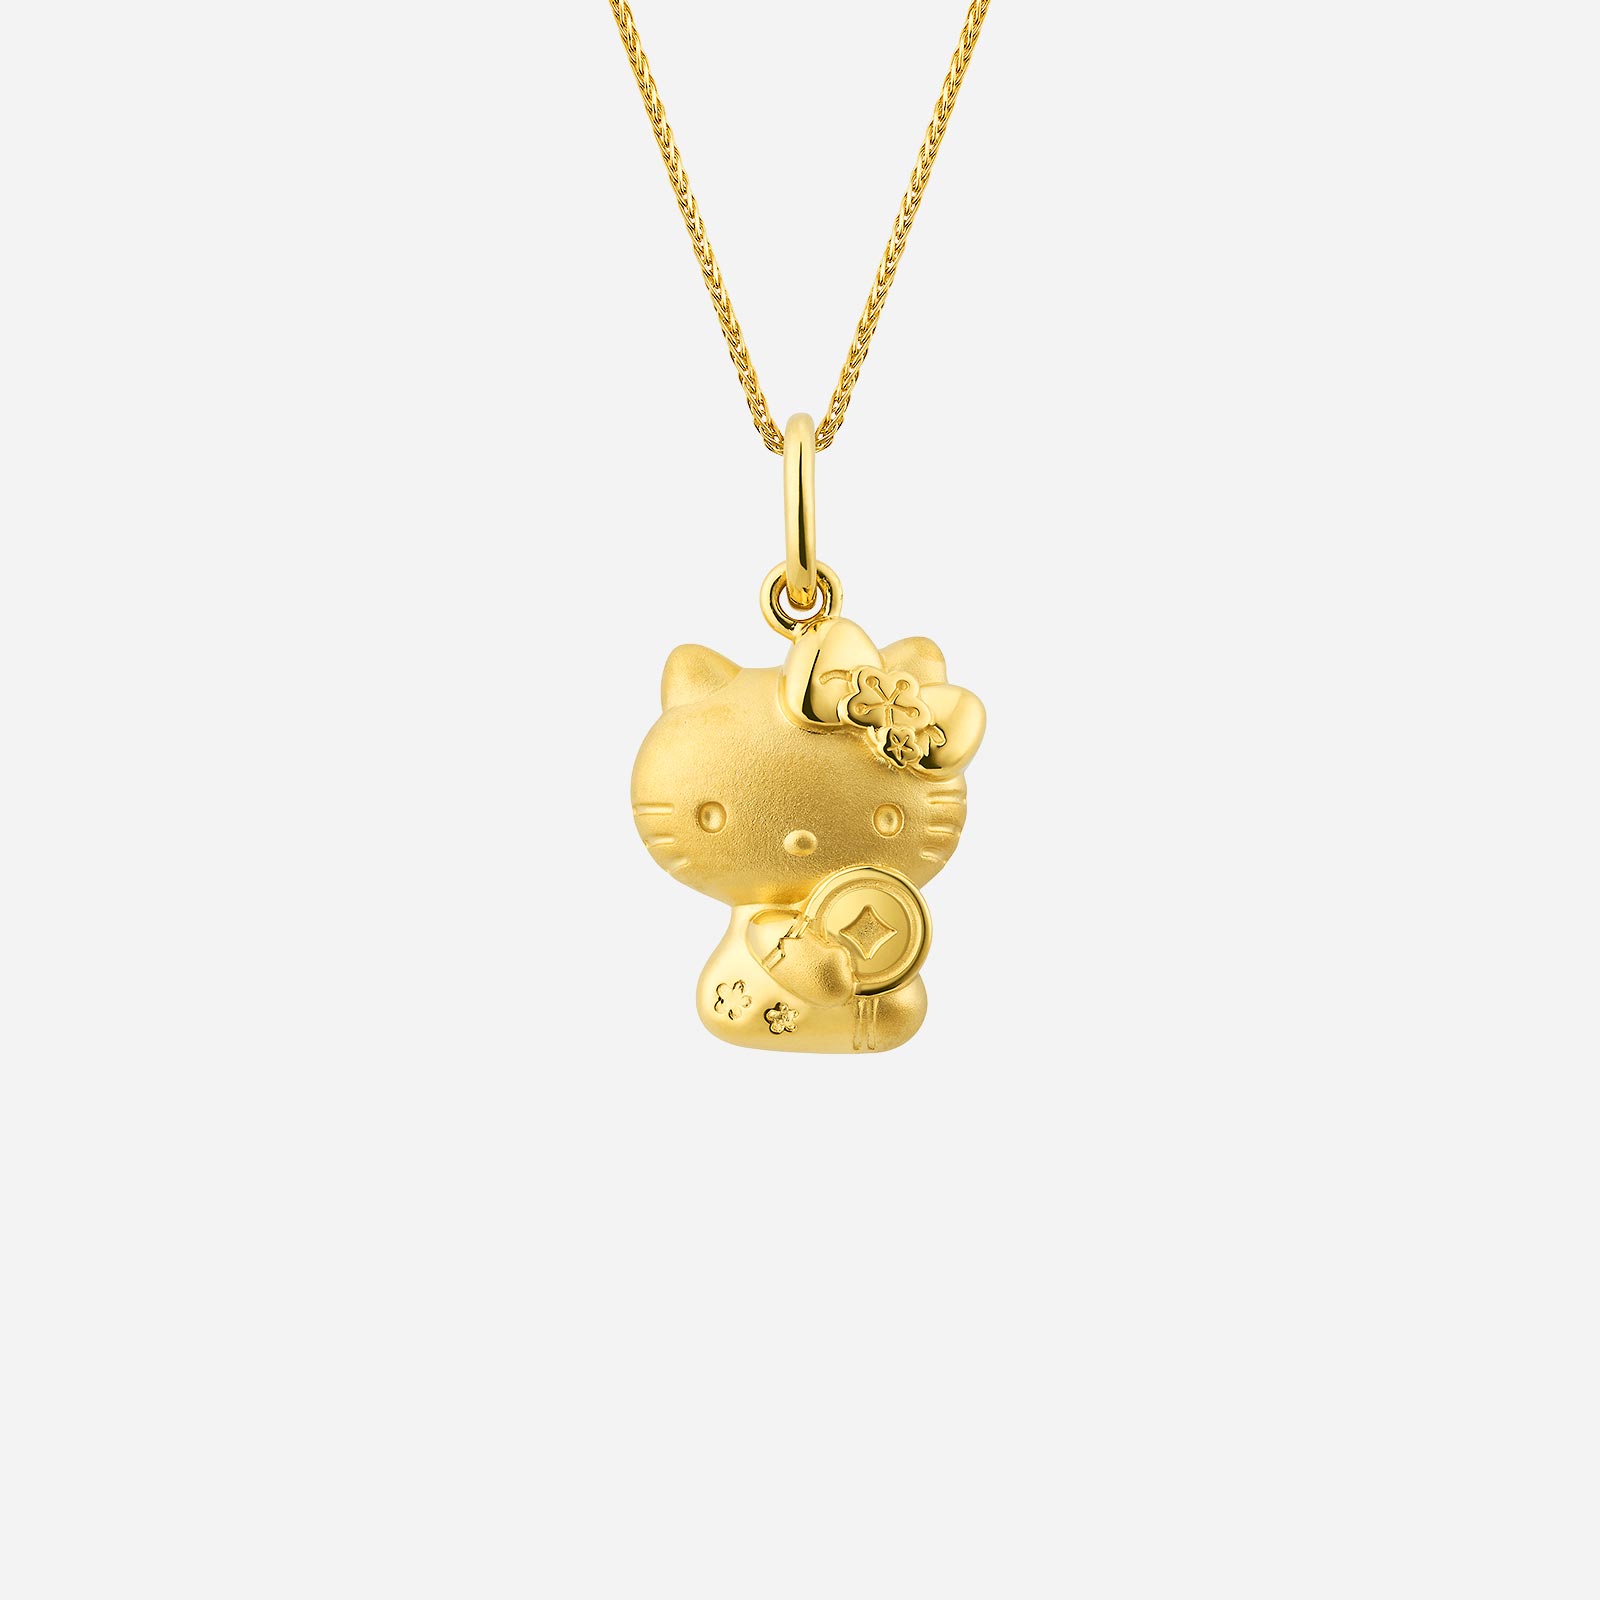 Poh Heng Hello Kitty Golden Coin Pendant in 22K Yellow Gold	